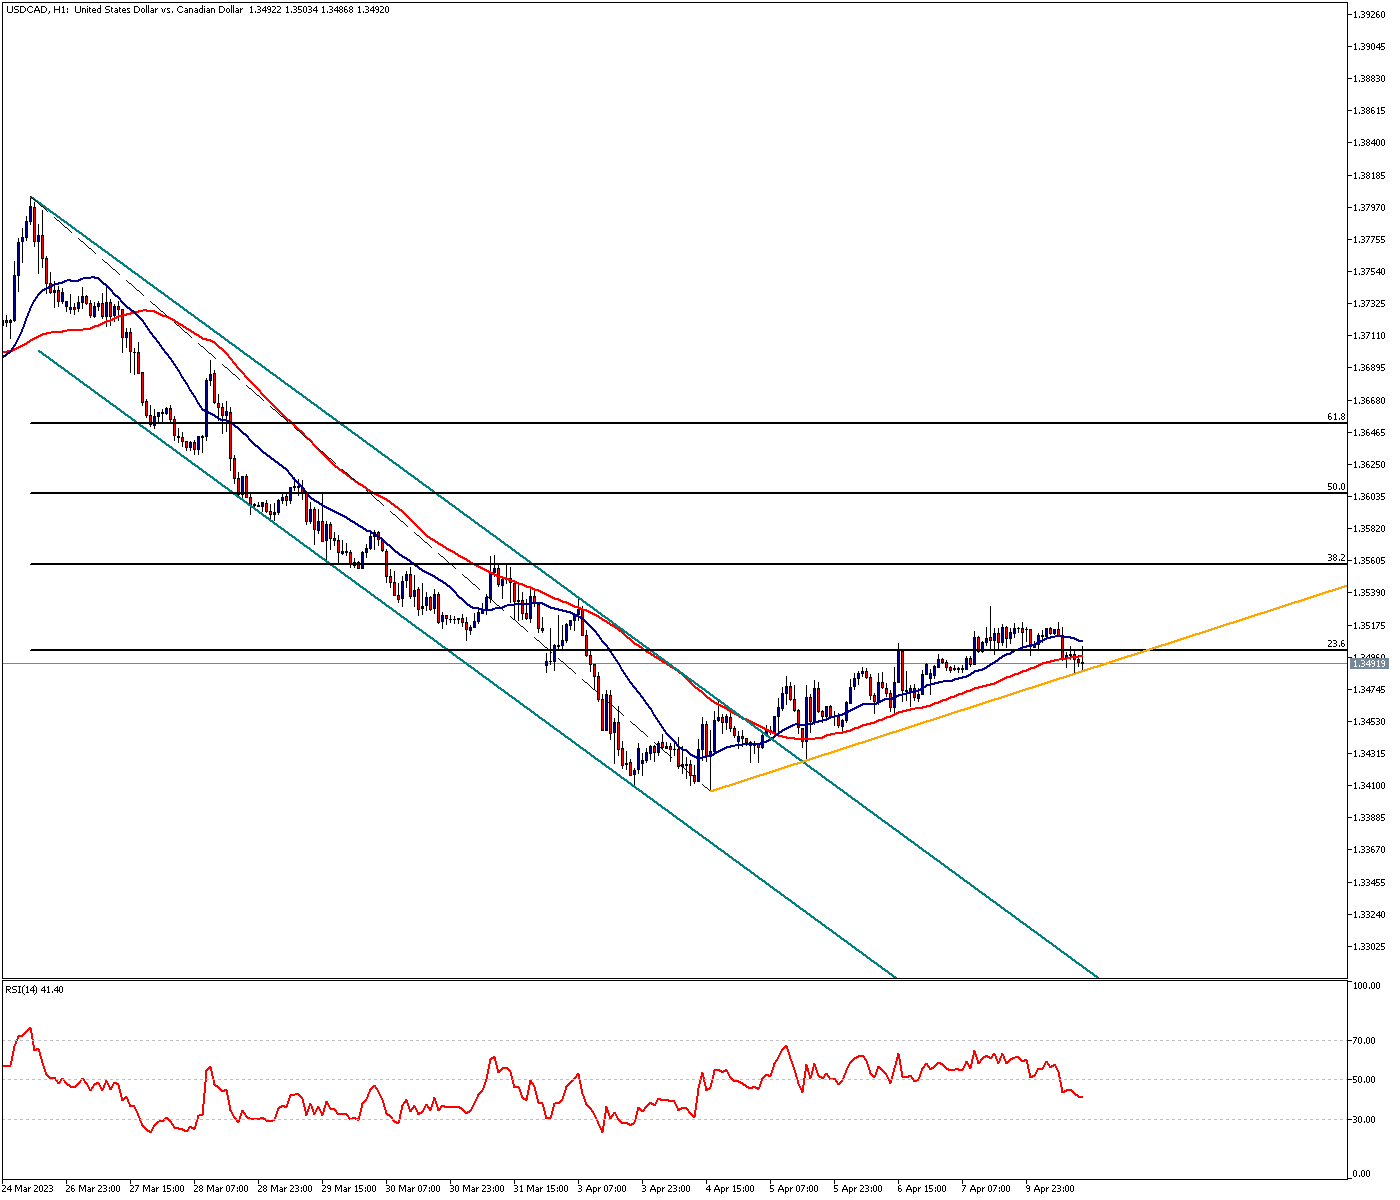 USDCAD Trying to Maintain Its Persistence on Uptrend